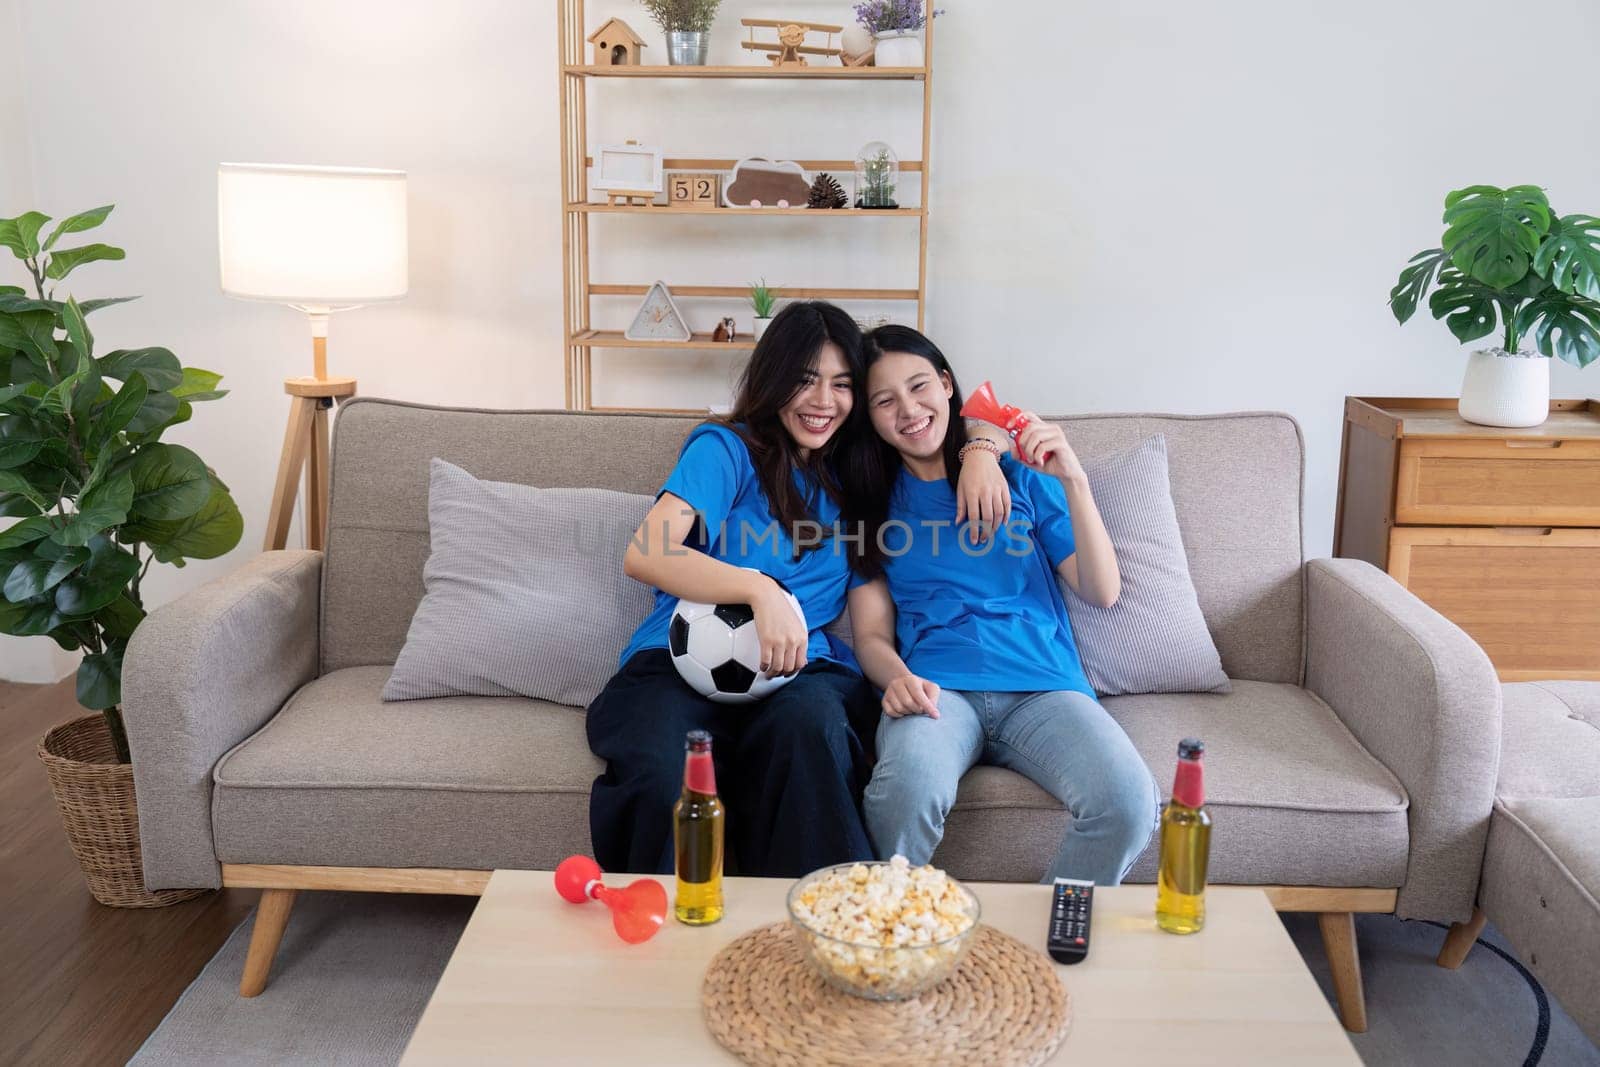 Lesbian couple cheering for Euro football match at home with drinks and popcorn. Concept of LGBTQ pride, sports enthusiasm, and celebration by nateemee